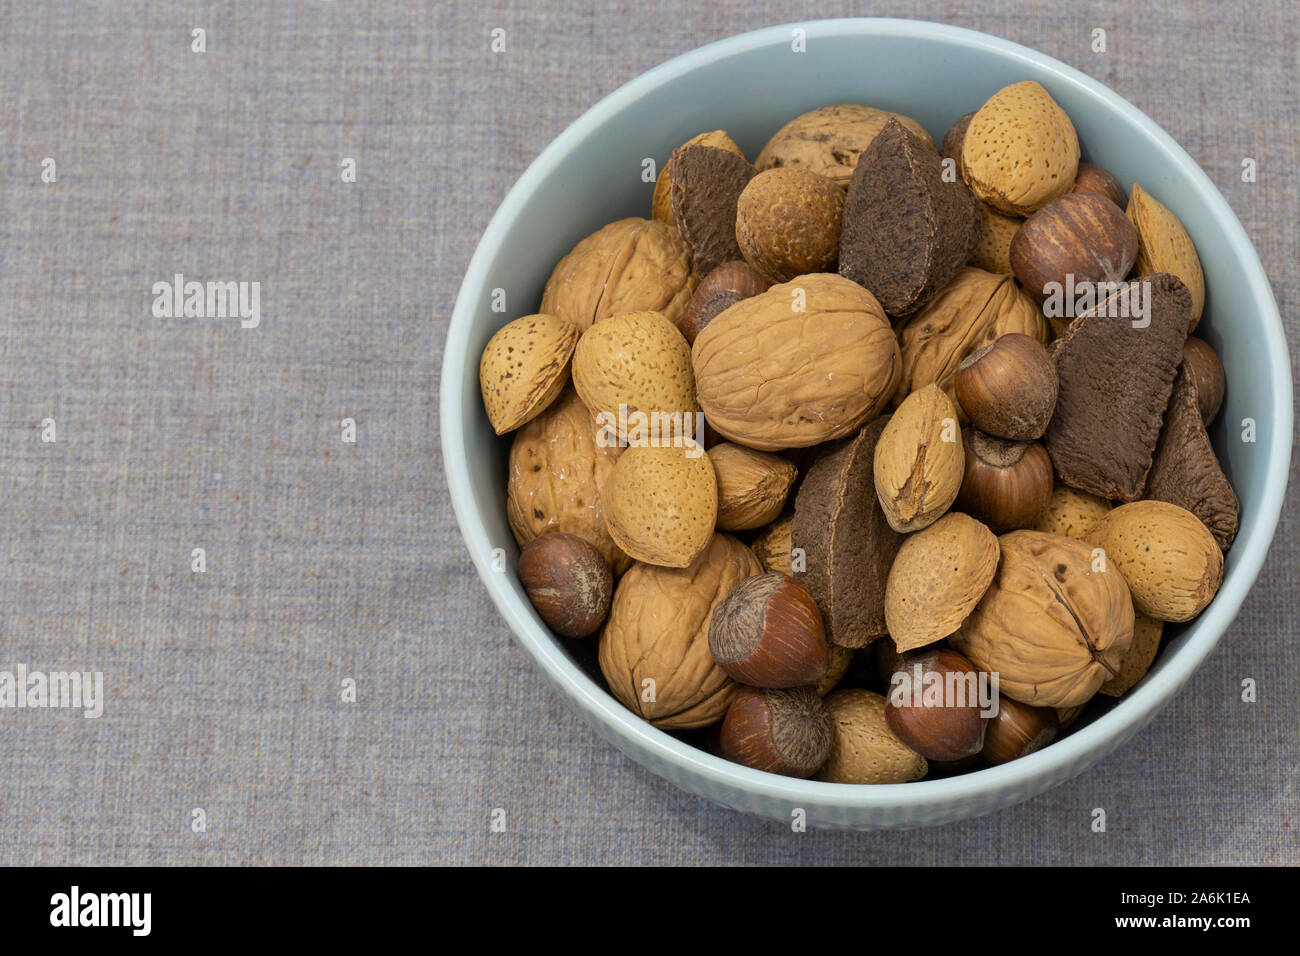 Mixed nuts, including almonds, hazelnuts, walnuts and Brazil nuts